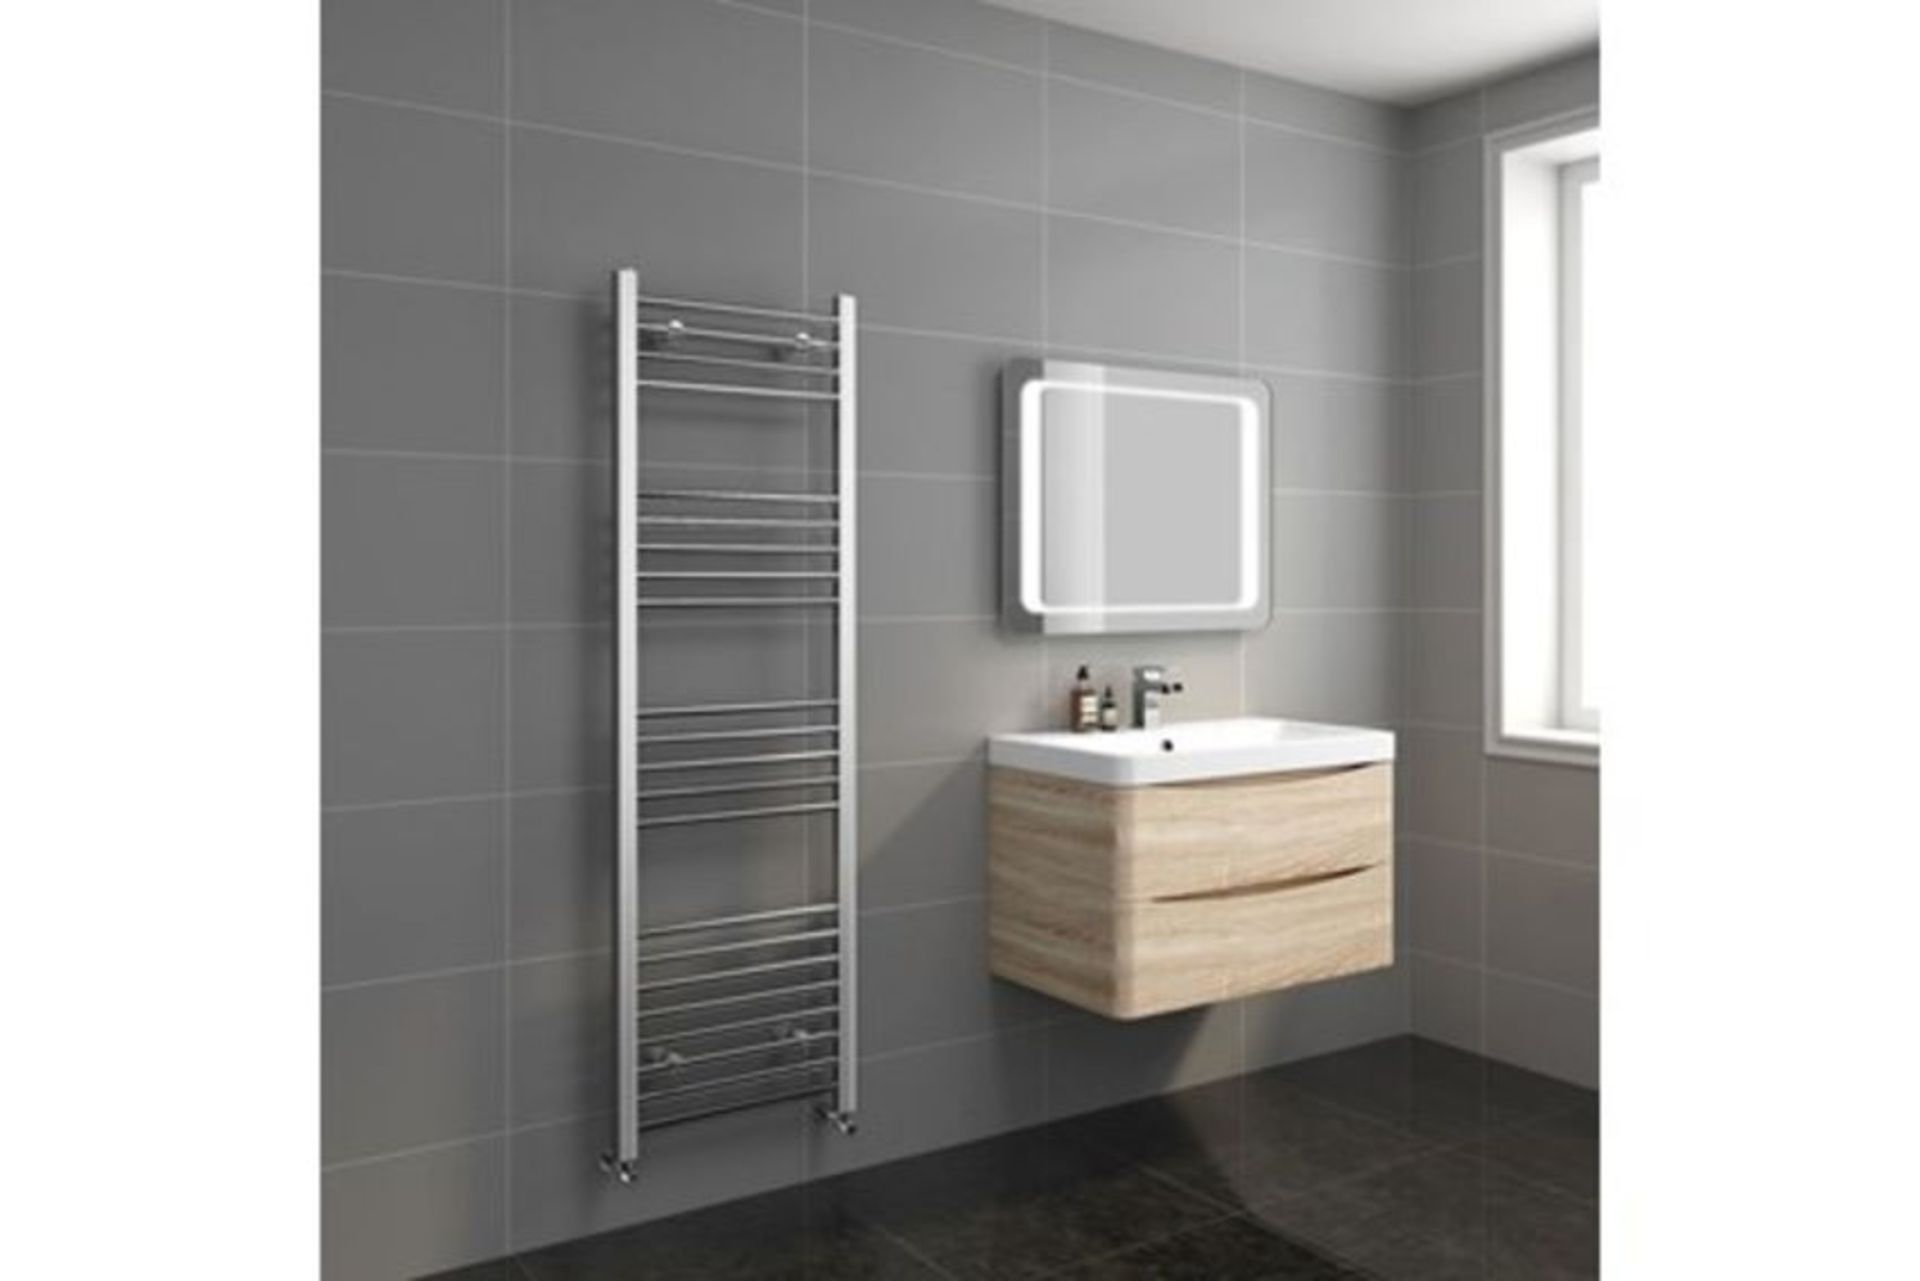 NEW 1600x500mm - 20mm Tubes - Chrome Heated Straight Rail Ladder Towel Radiator. NS1600500.Made from